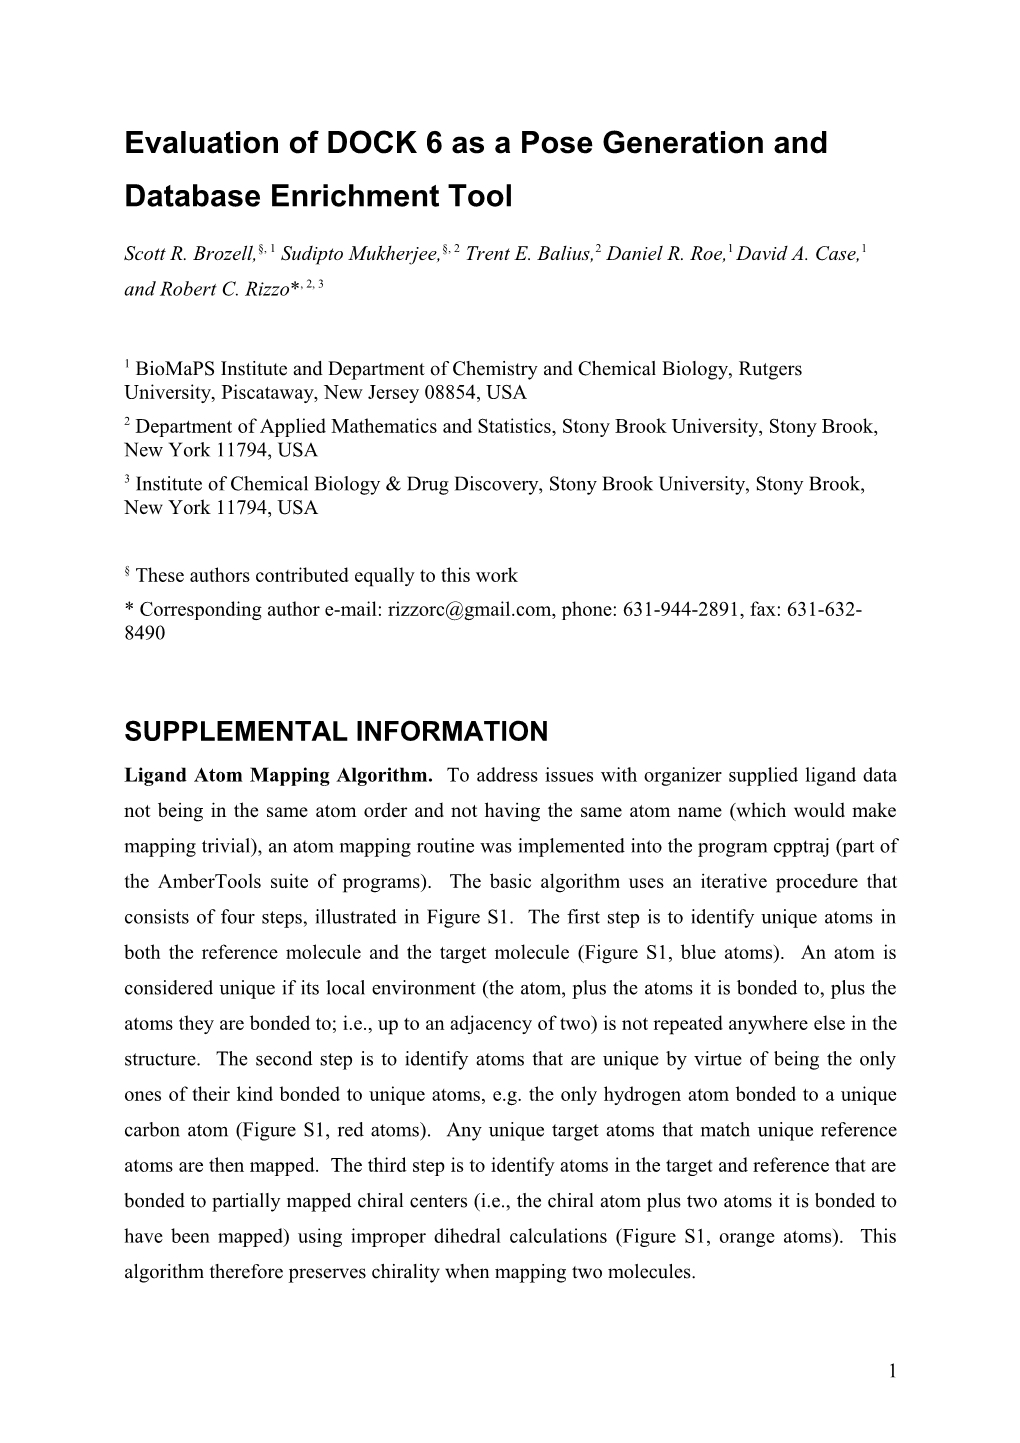 Author Template for Journal Articles s8